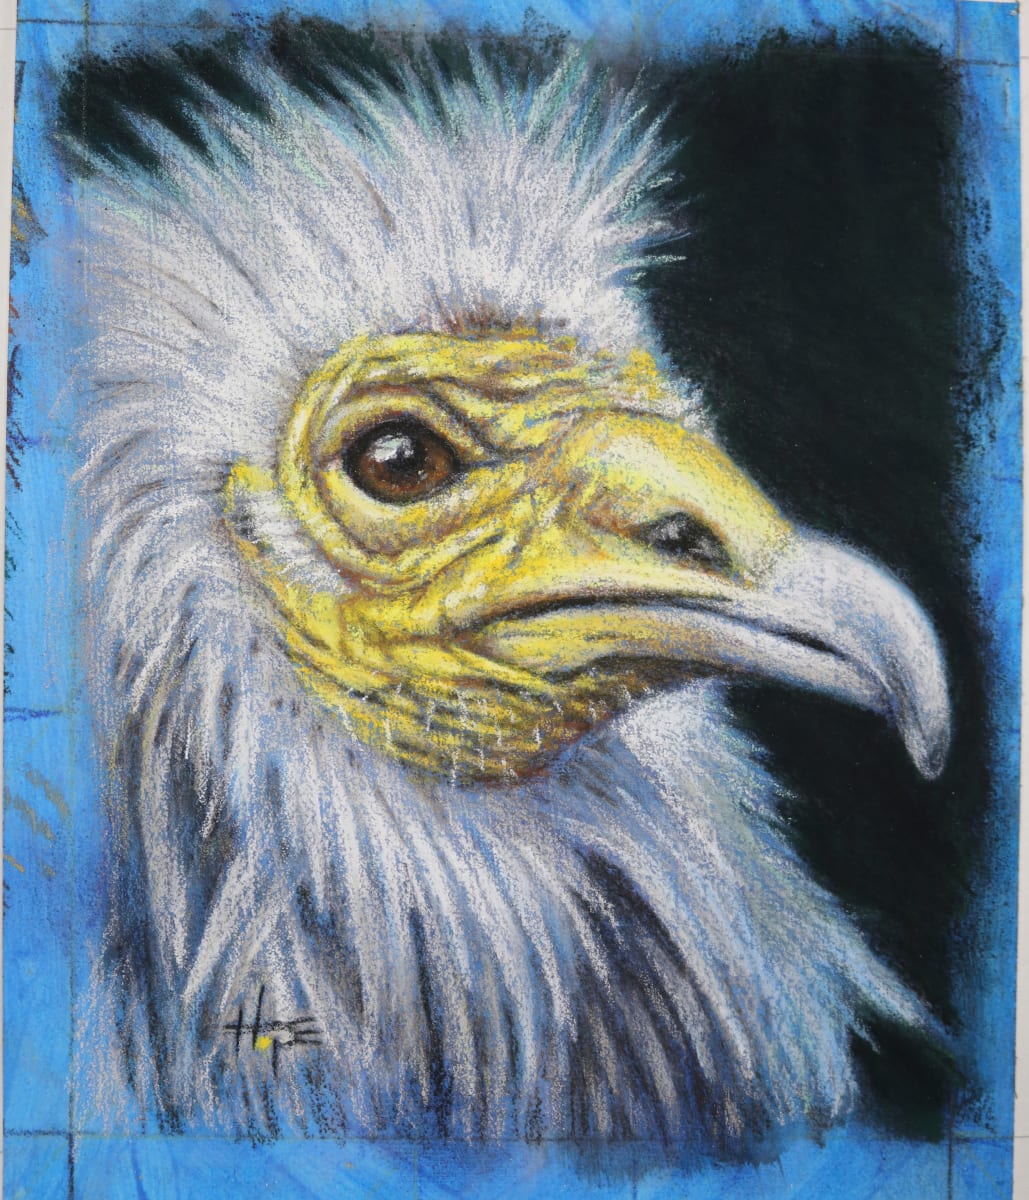 Egyptian Vulture study by Hope Martin 